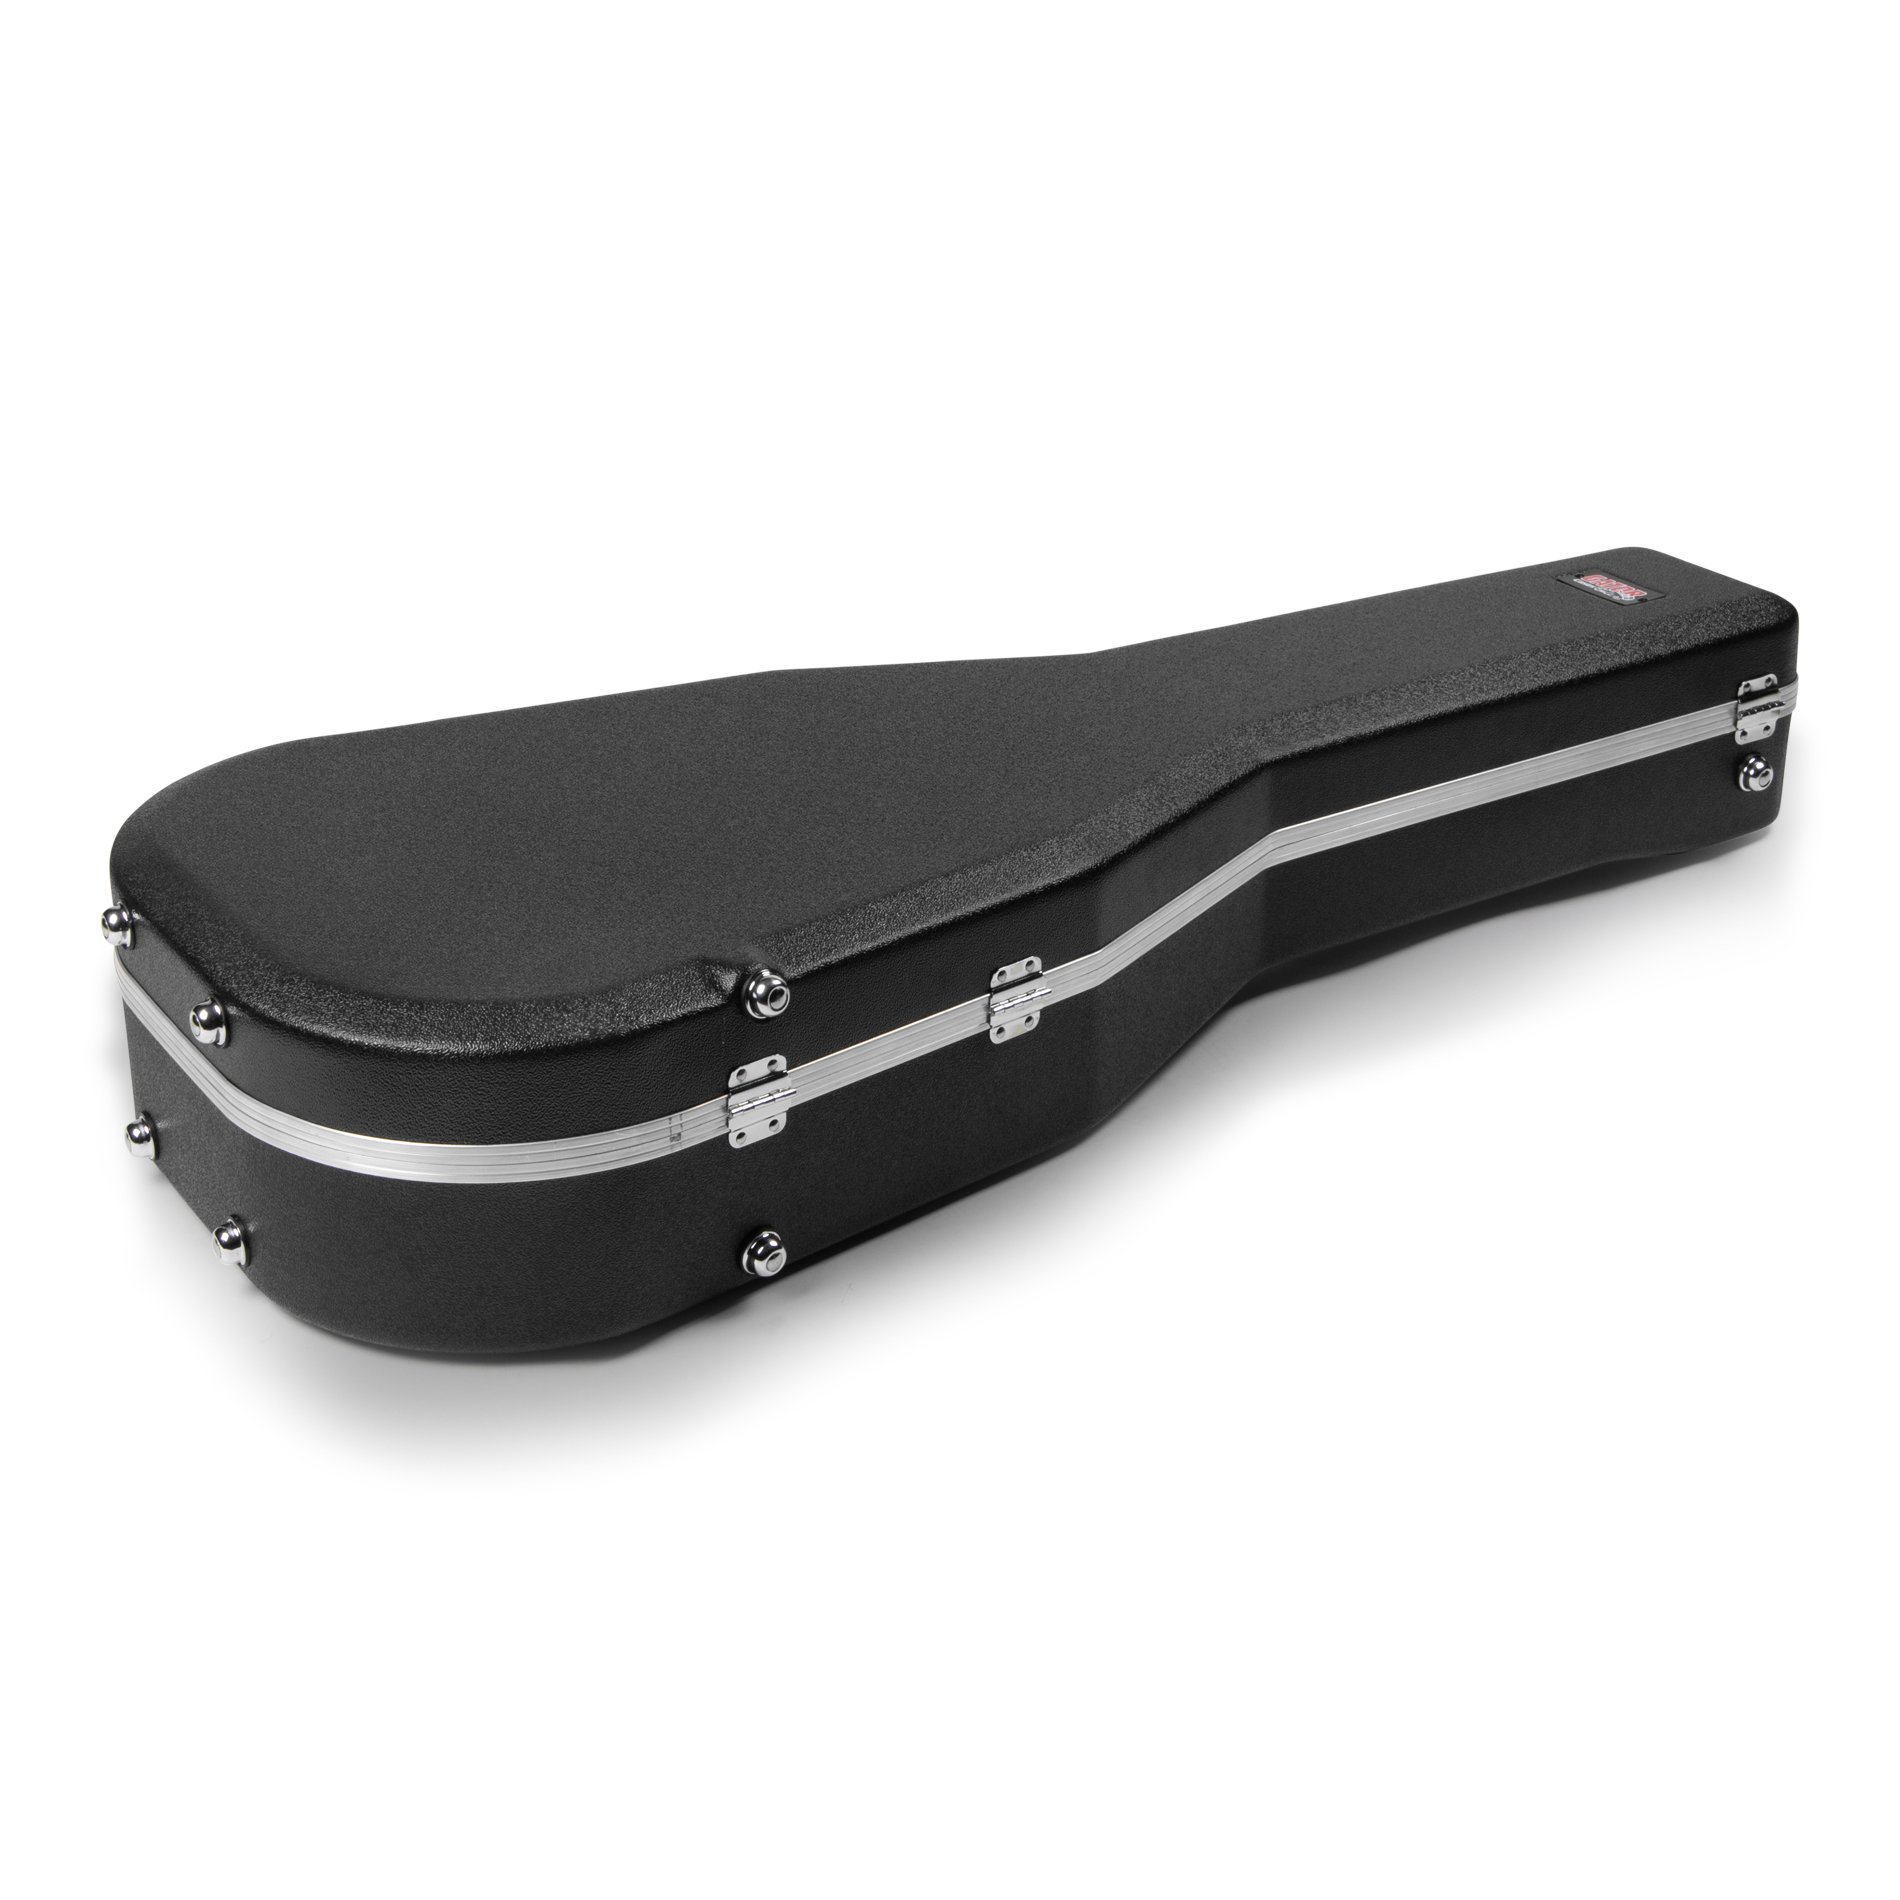 Deluxe Molded Case for Parlor Guitars-GC-PARLOR